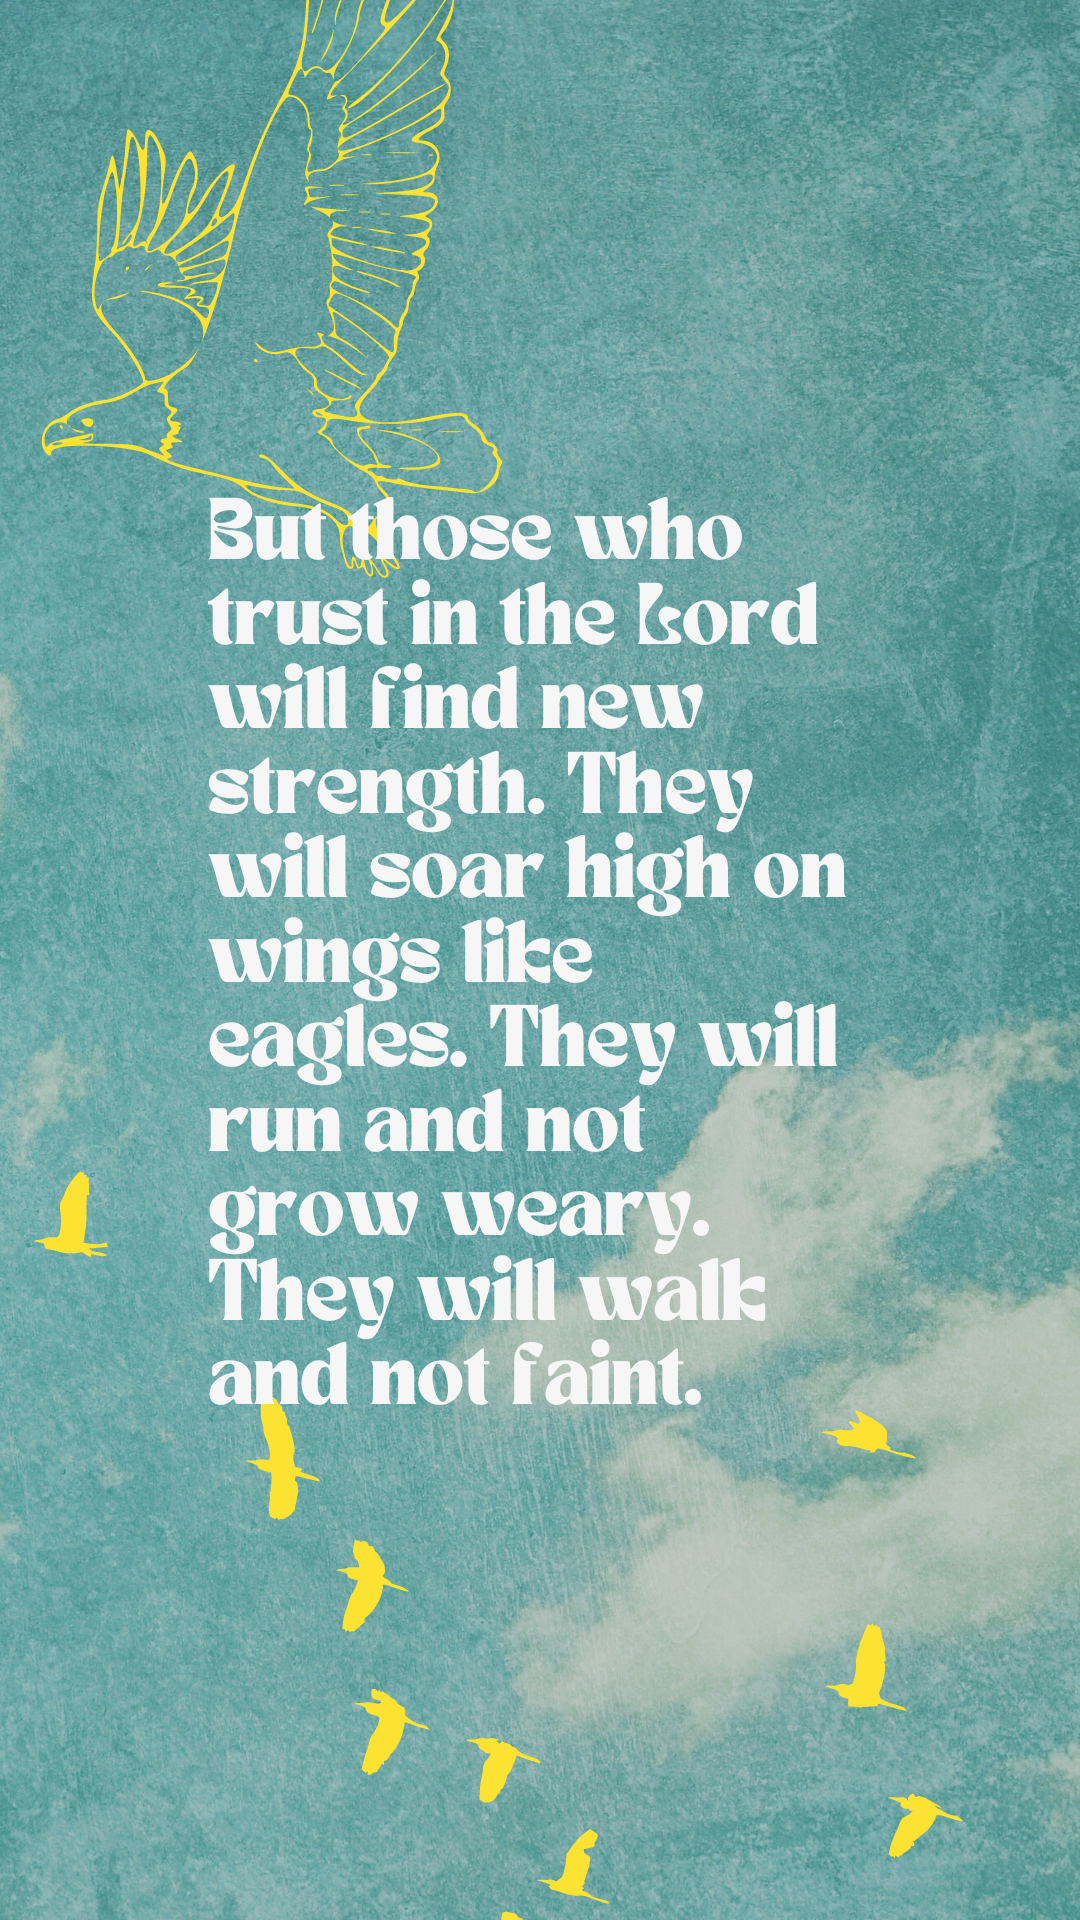 But those who trust in the Lord will find new strength. They will soar high on wings like eagles. They will run and not grow weary. They will walk and not faint..png